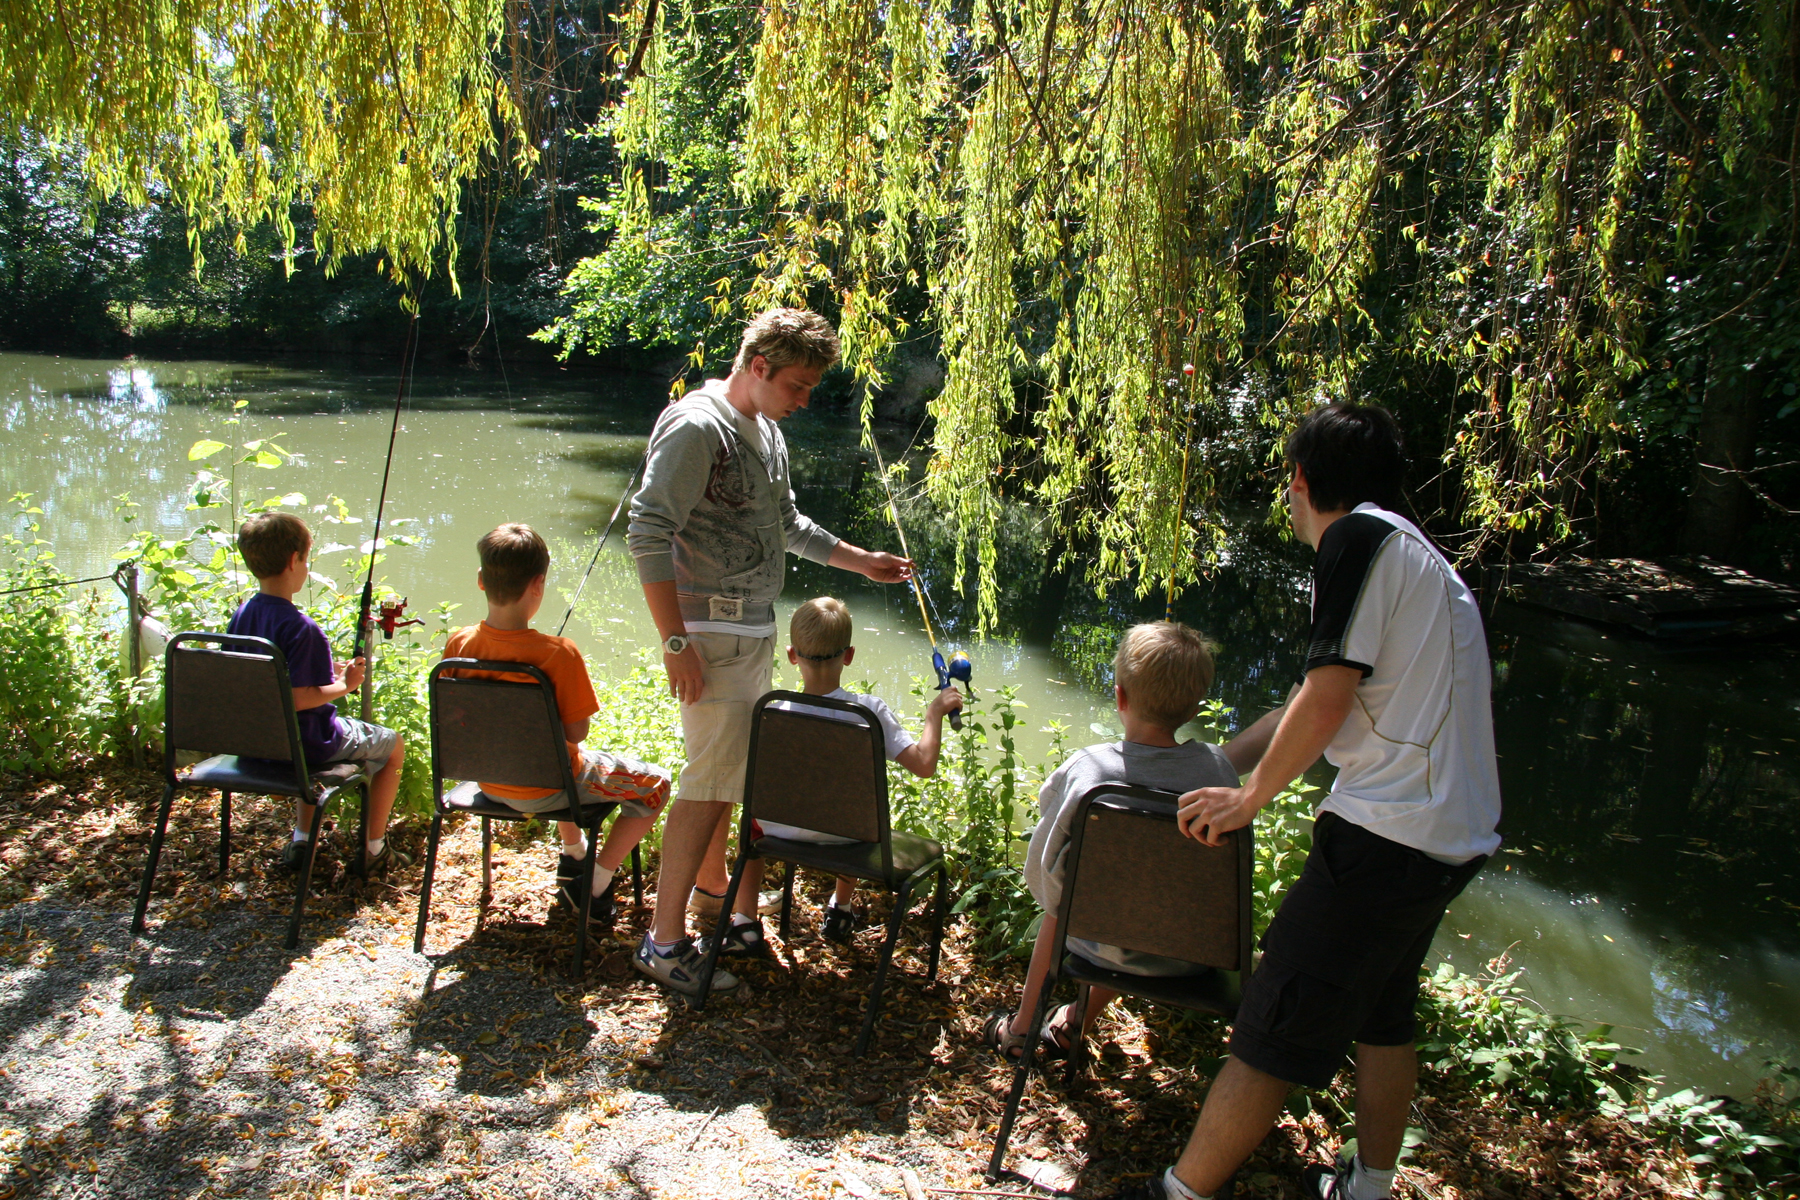 Counselors at Enchanted Hills Camp teach young campers to fish.